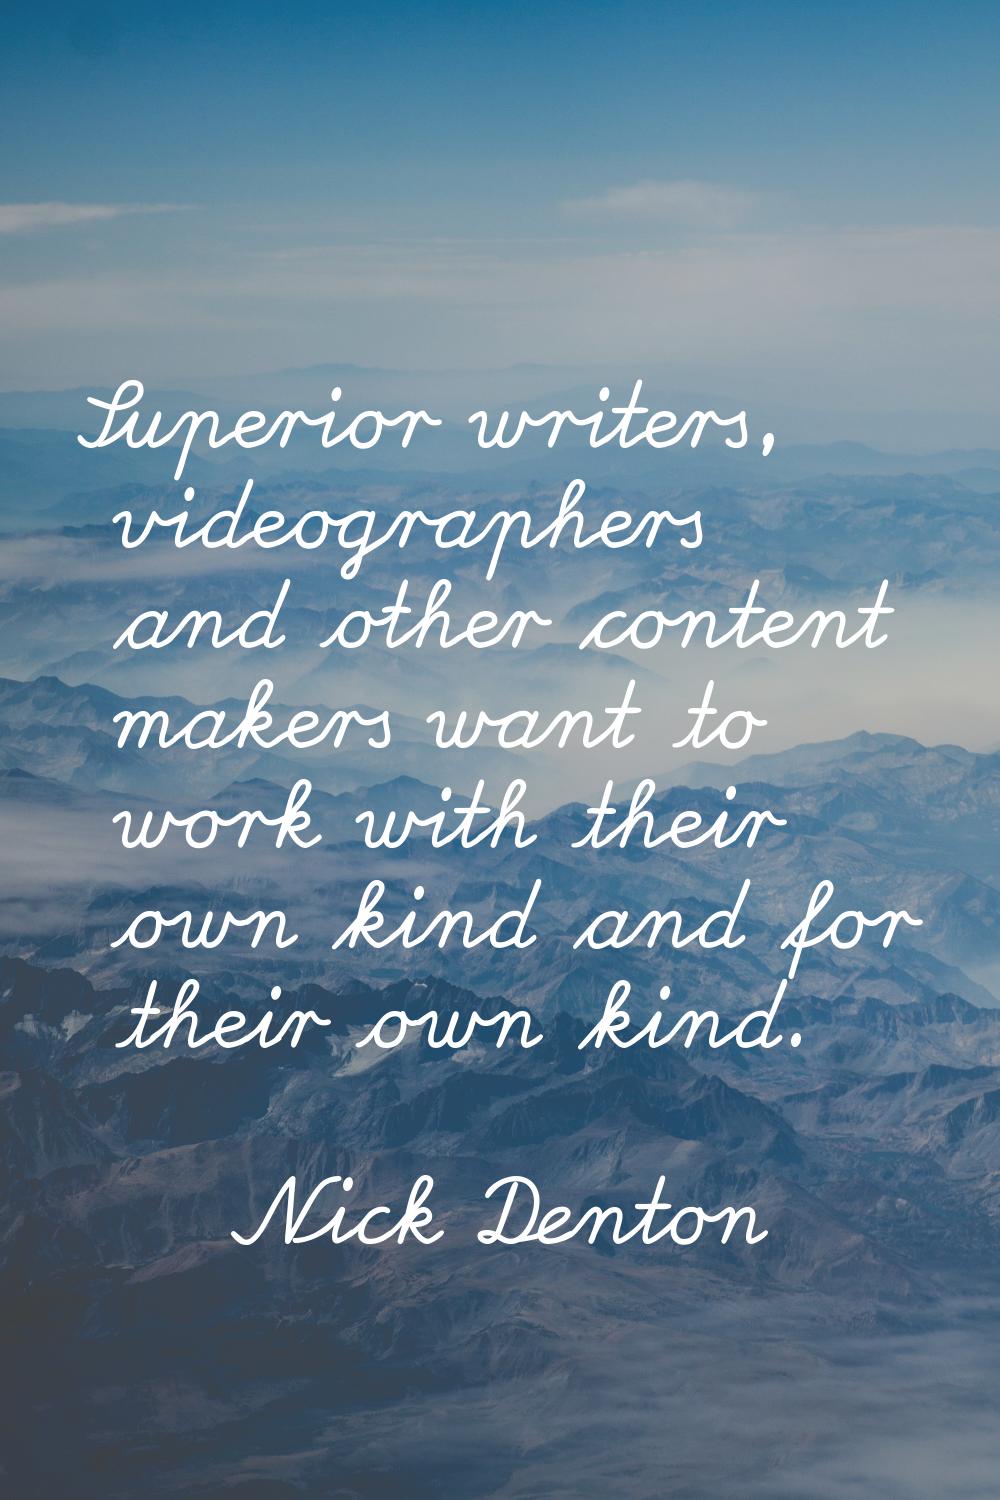 Superior writers, videographers and other content makers want to work with their own kind and for t